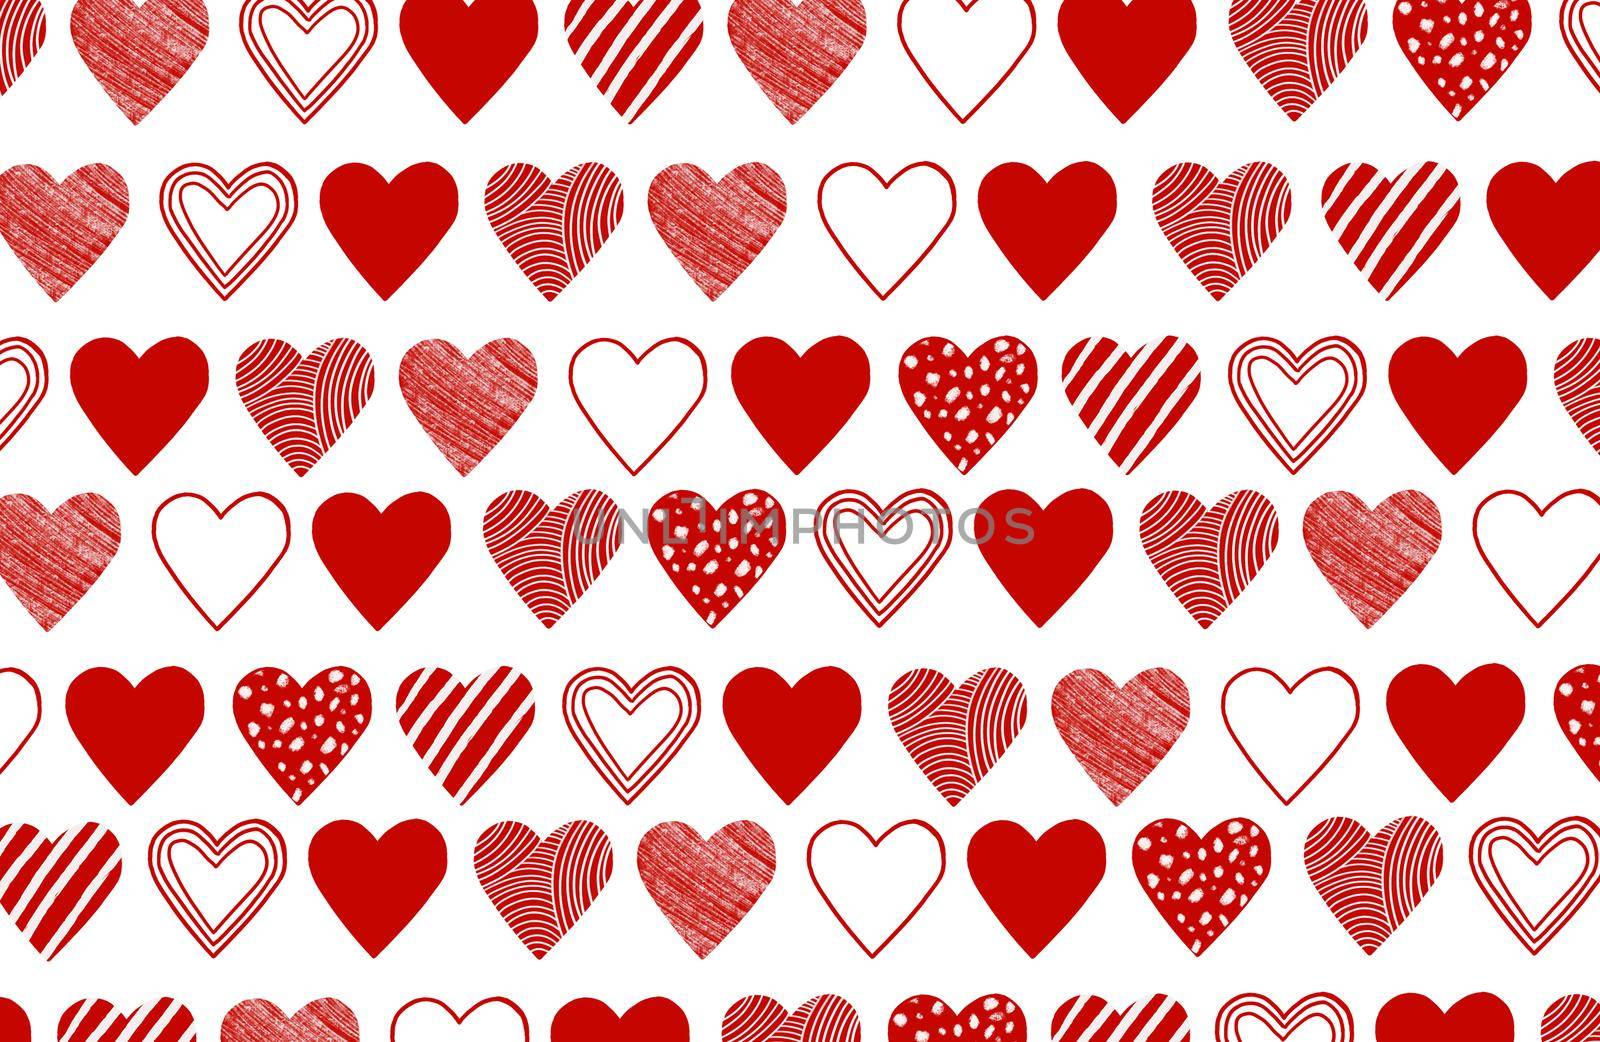 Hand drawn red hearts illustration. Bright pattern for Saint Valentine's day by lavsketch